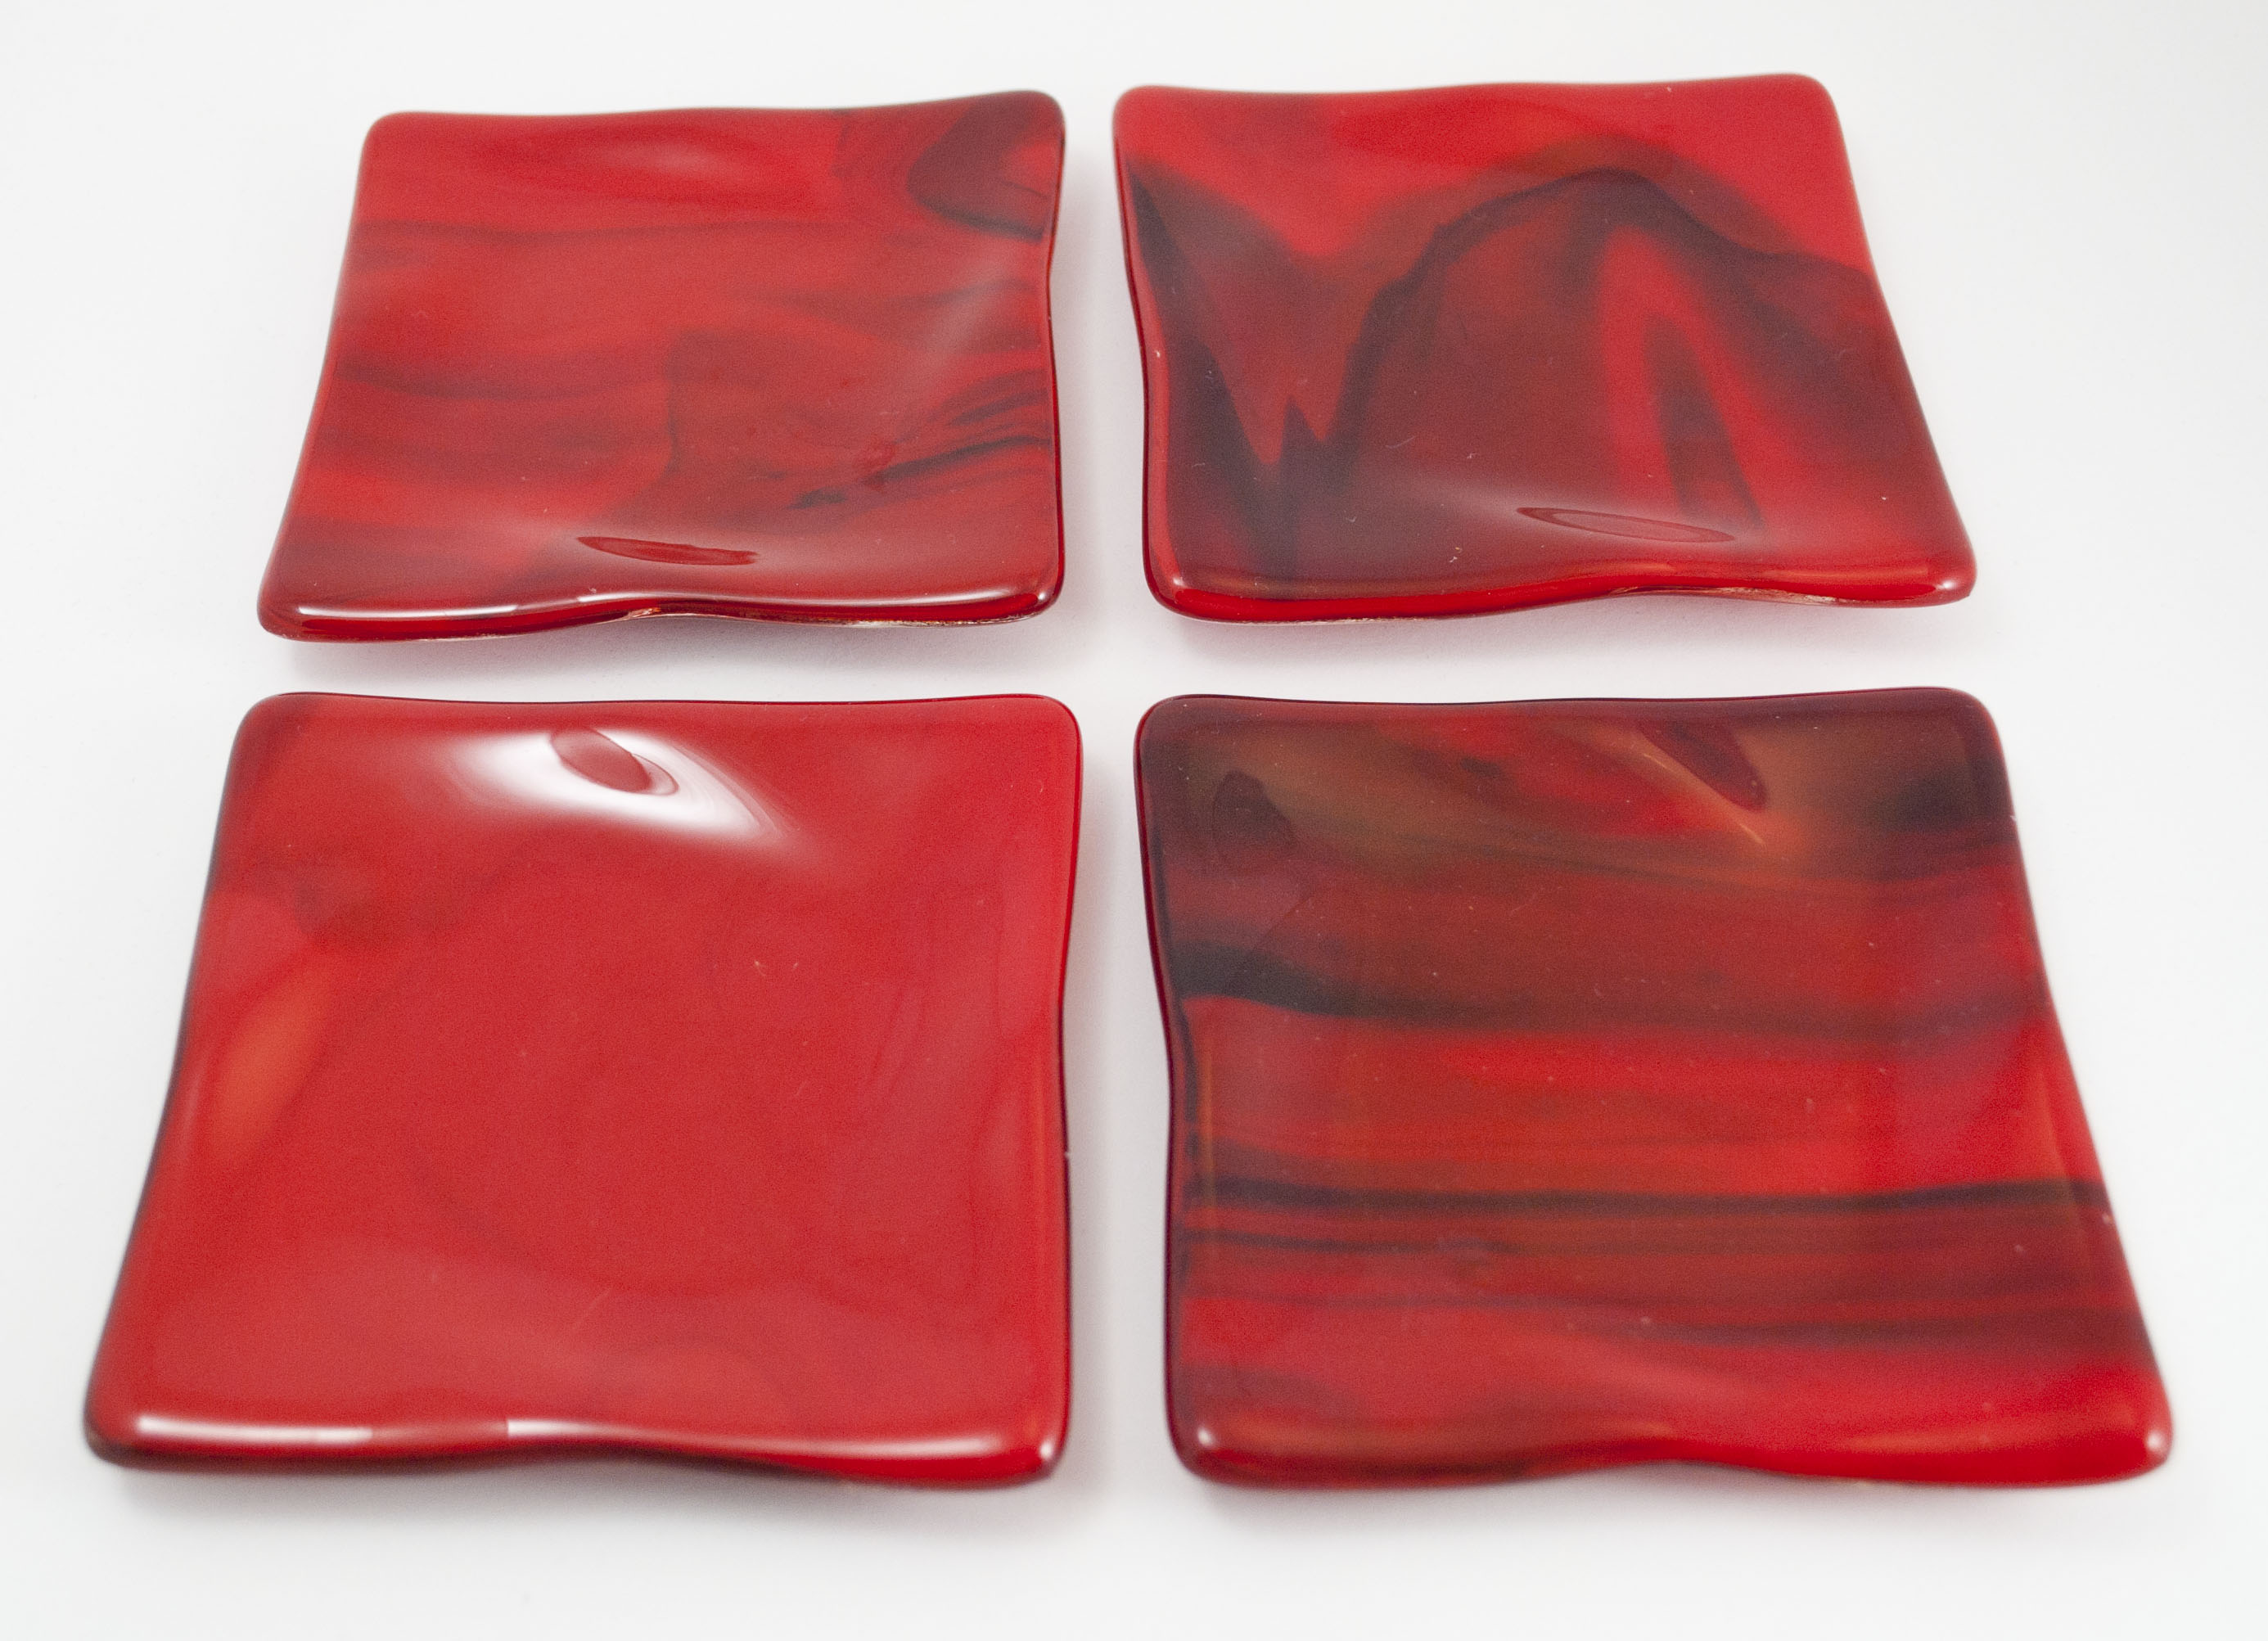 Red coasters